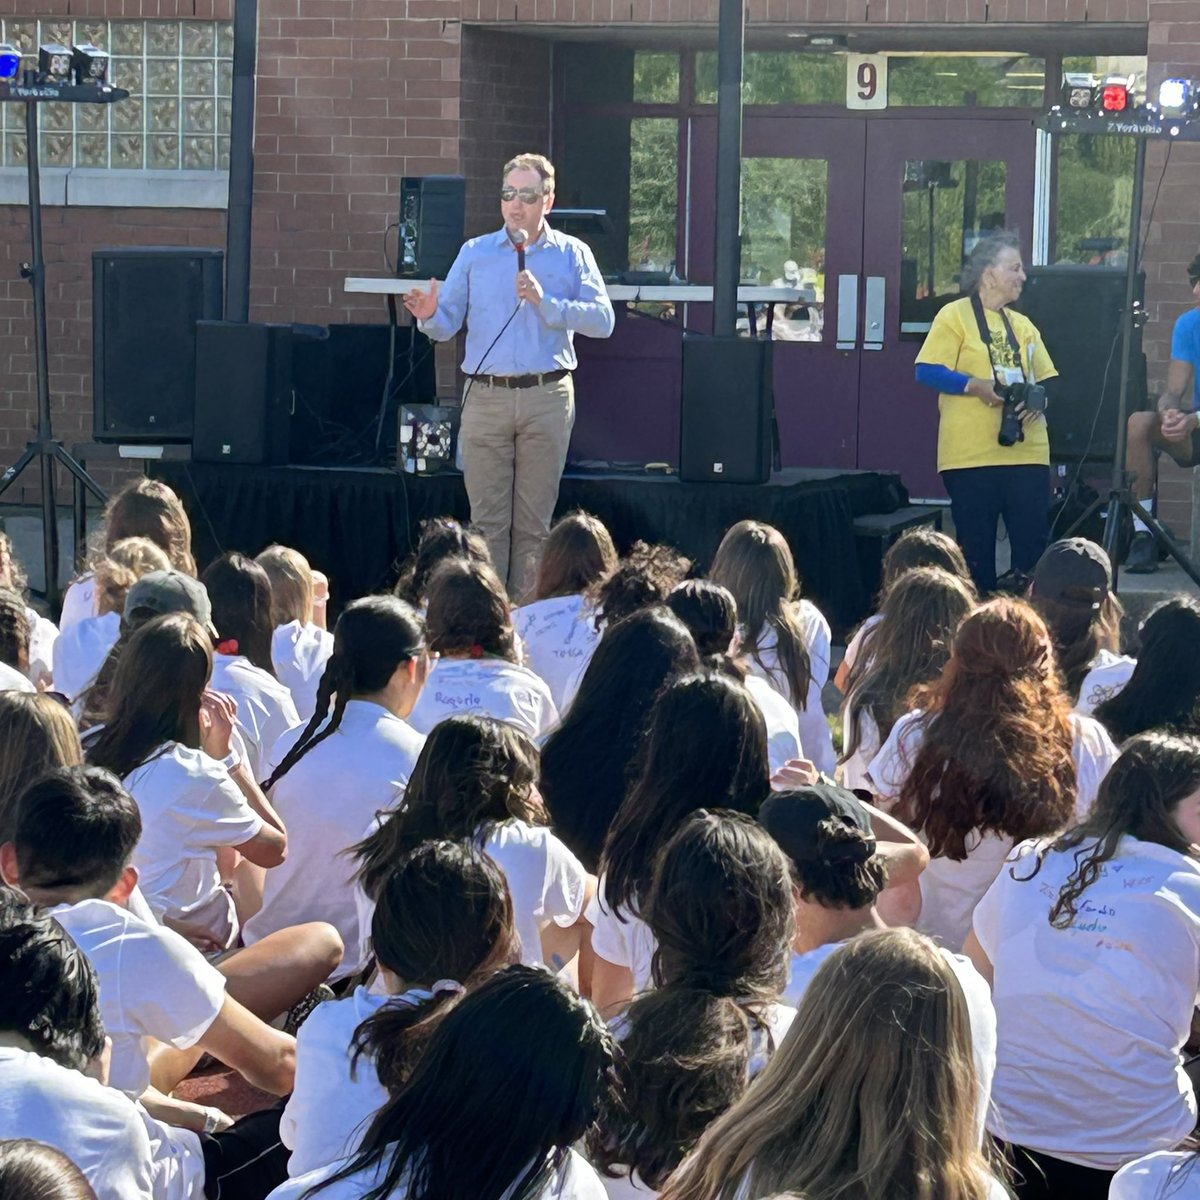 Honoured to join Iroquois Ridge High School at the Relay for Life event, supporting the fight against cancer. Thank you to the school and students for making a difference.